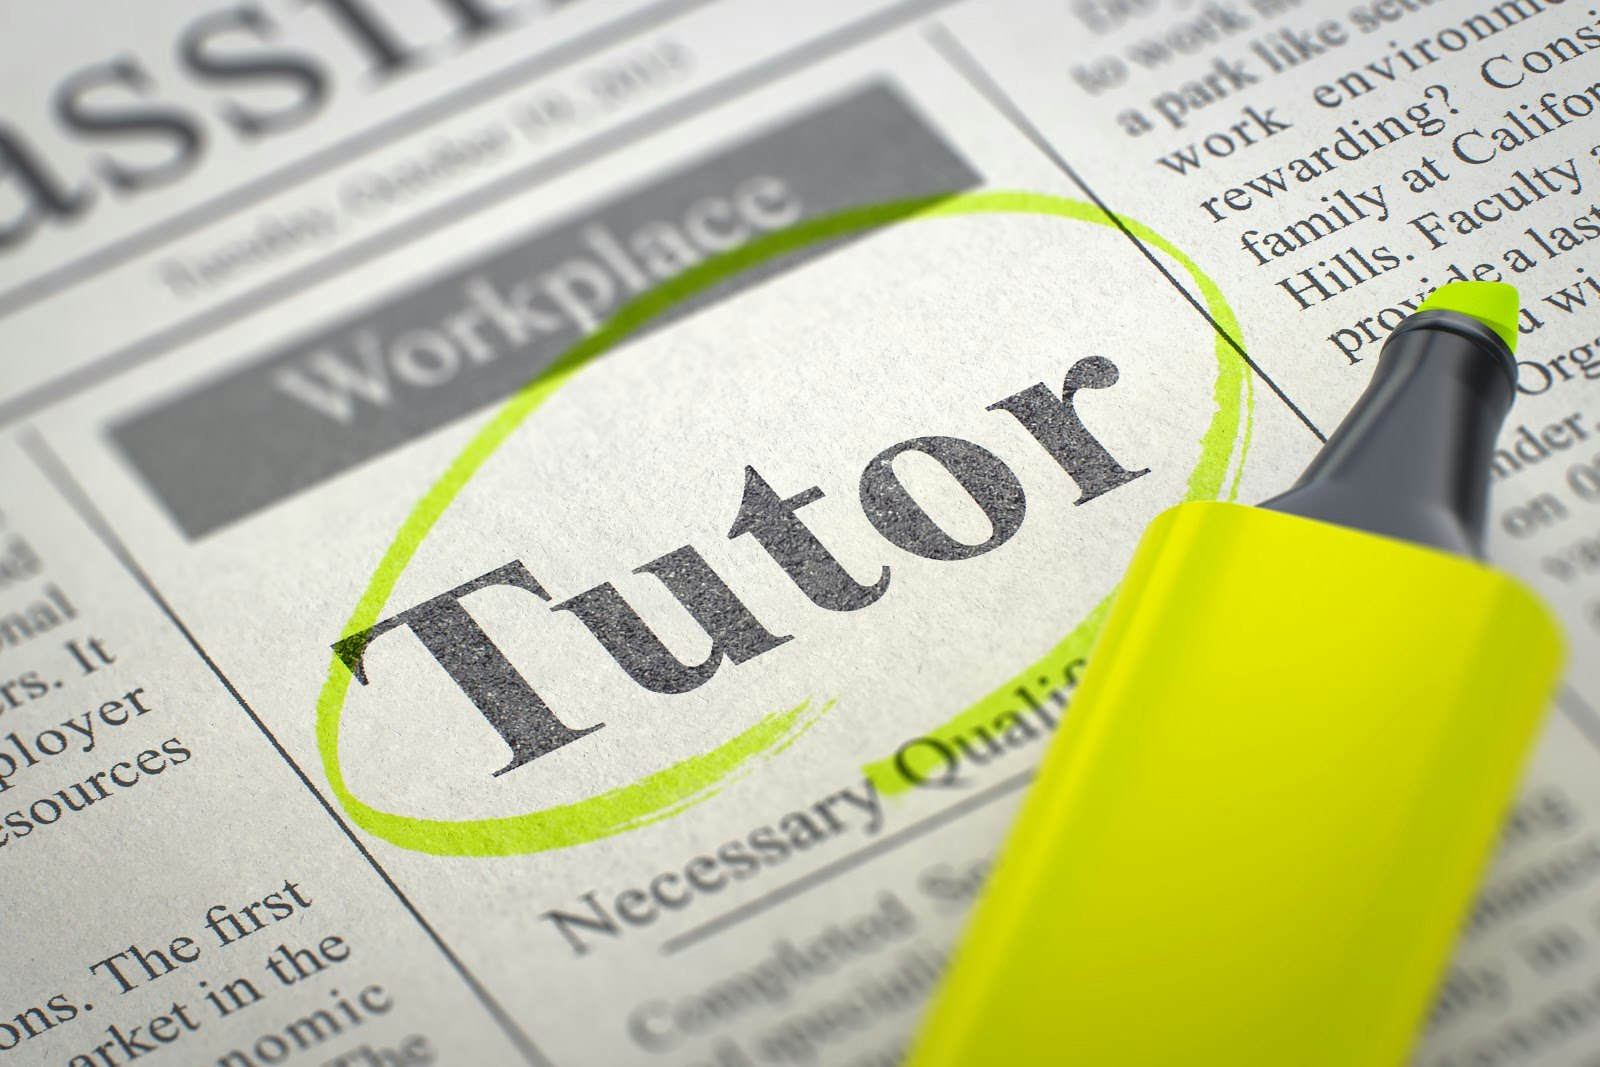 Updated: How to Advertise Your Tutoring Services